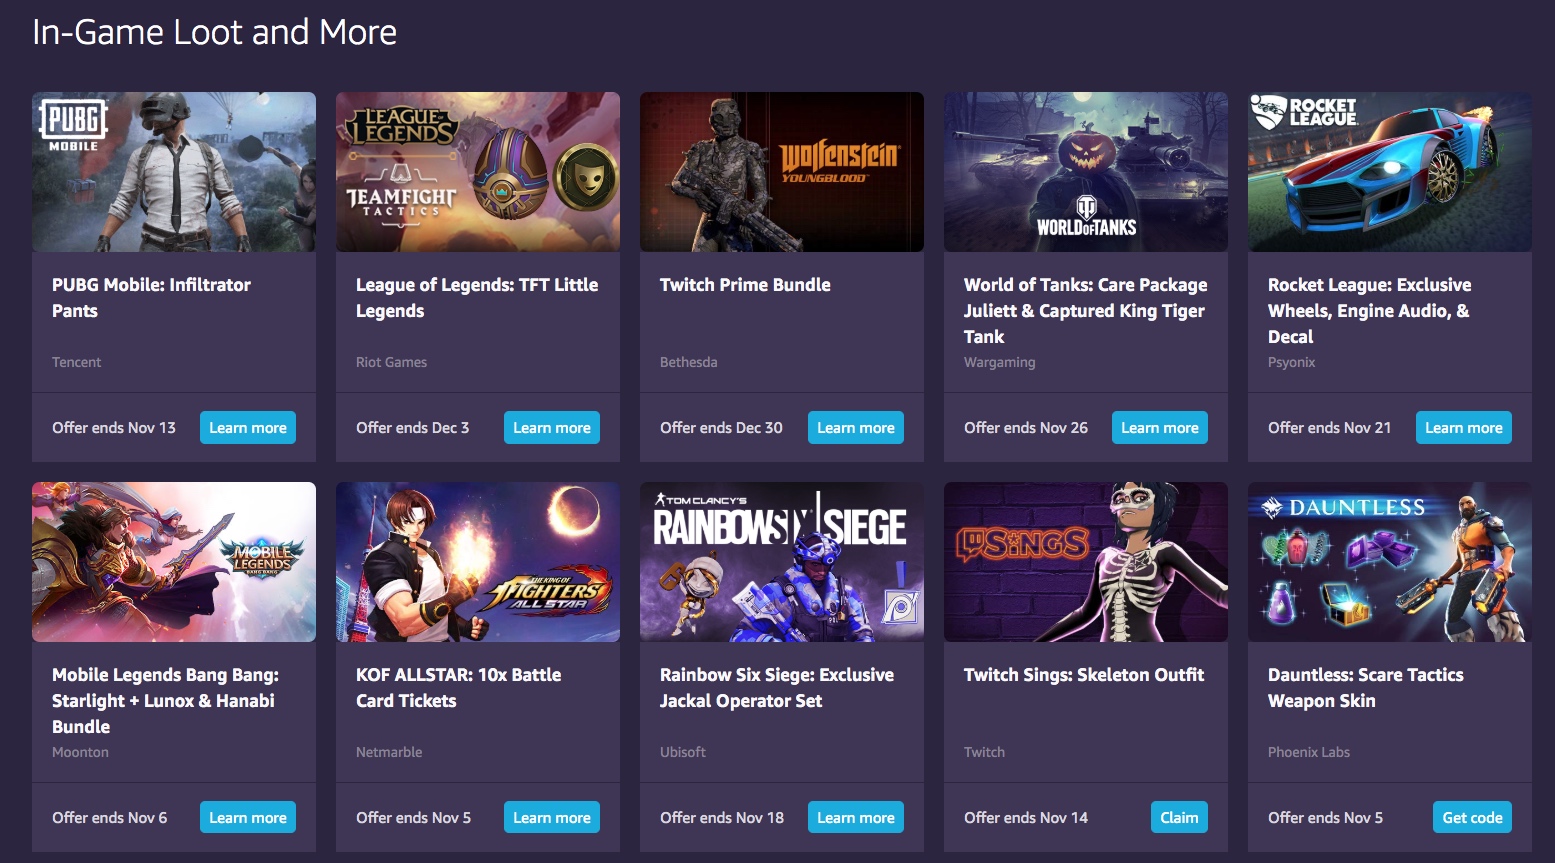 Twitch Prime free games and DLC